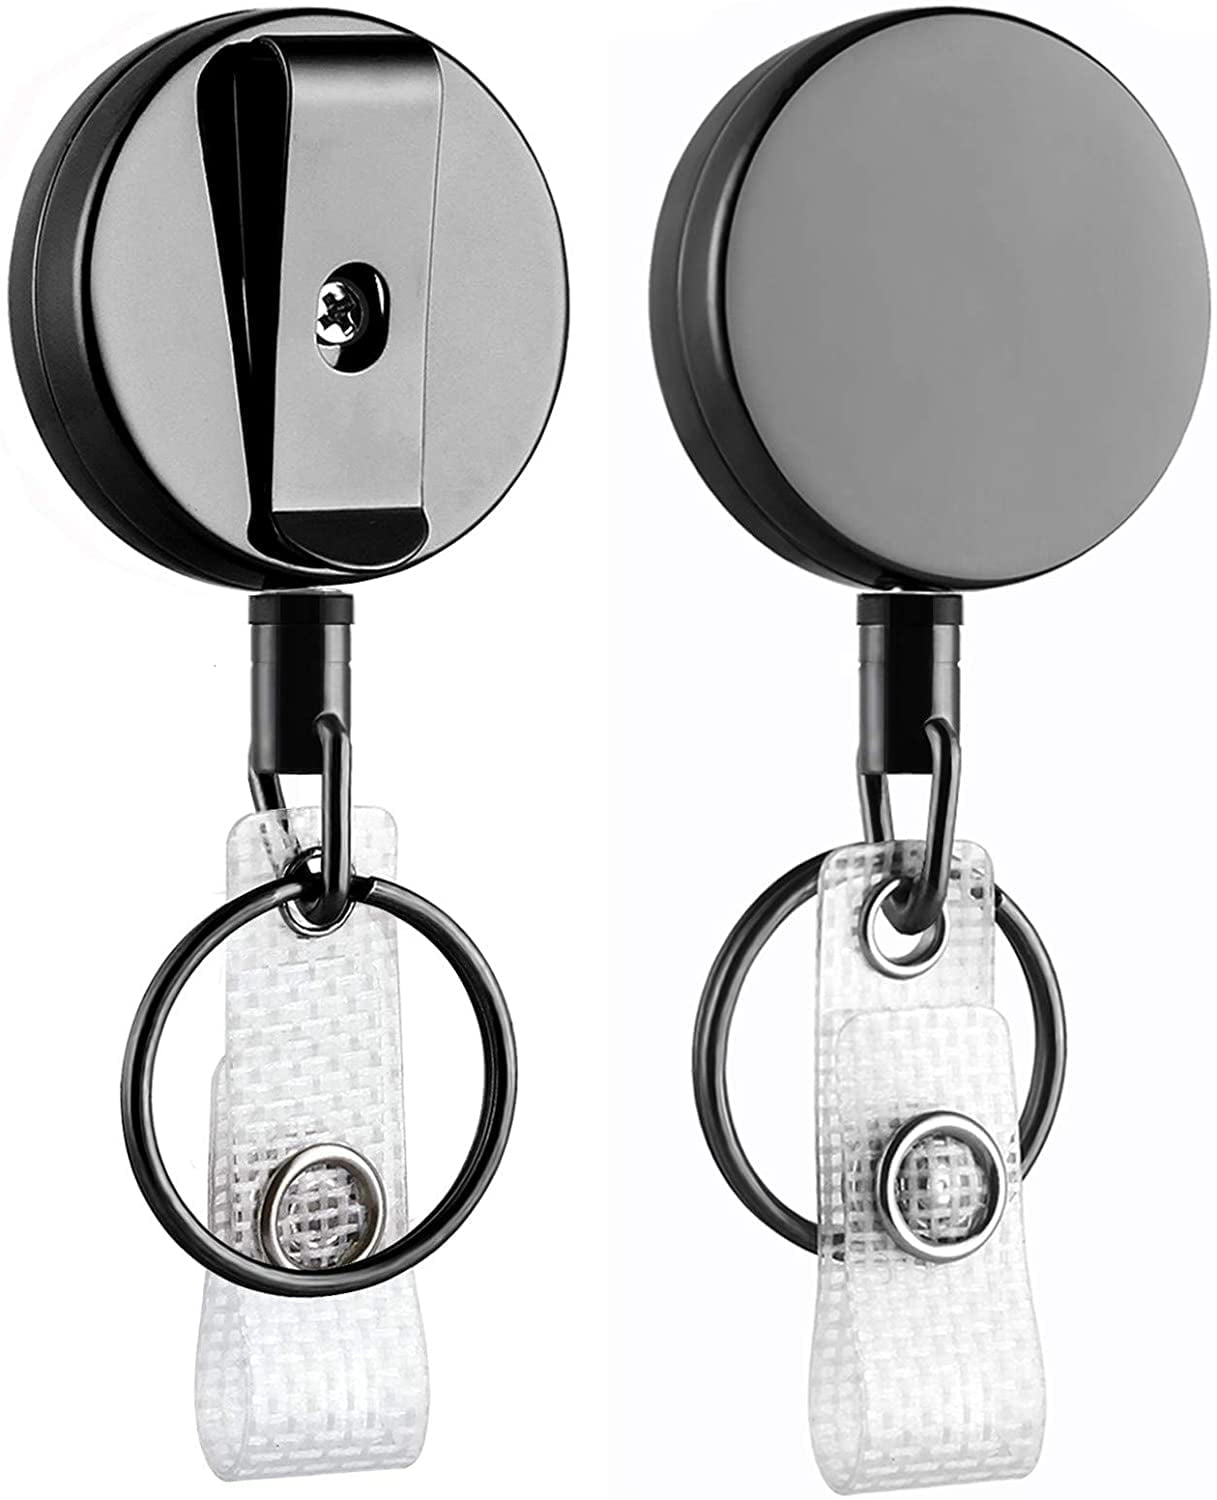 WOVTE 2 Pack Heavy Duty Retractable Badge Holder Reel, Will Well